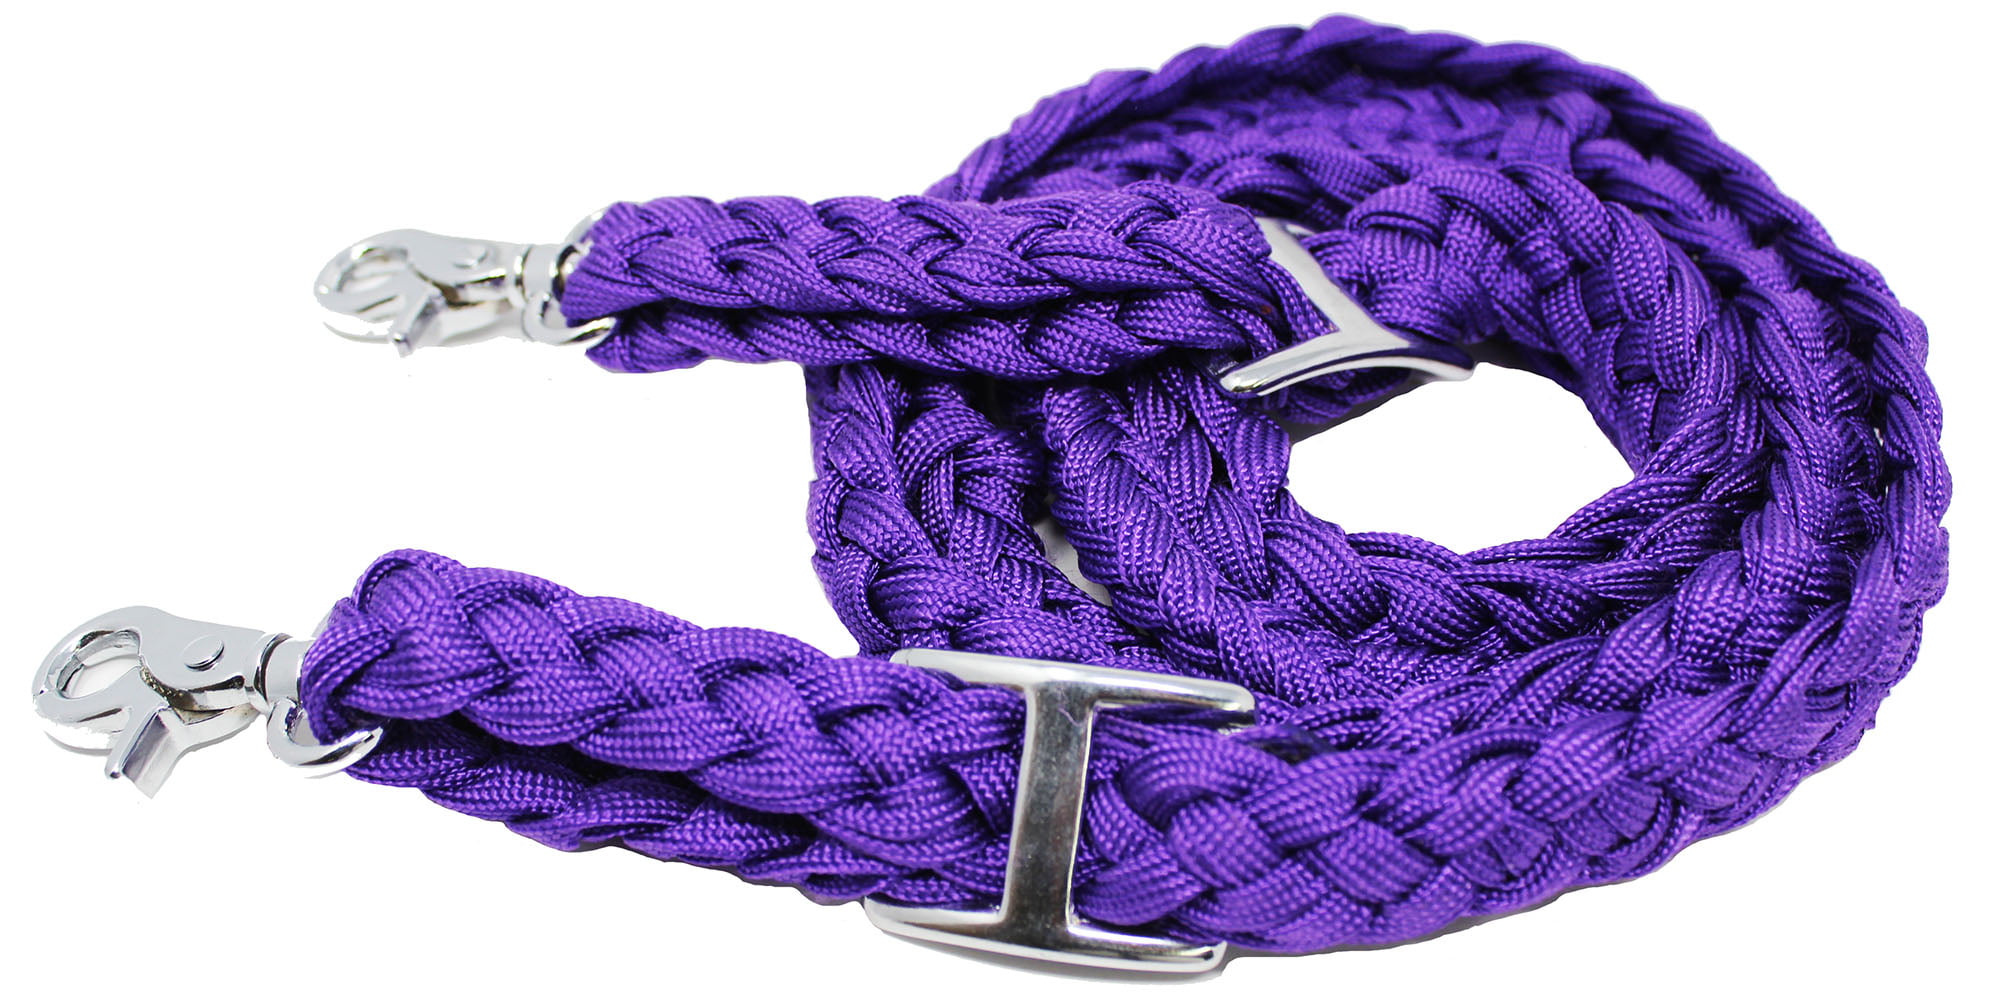 Horse Western Nylon Braided Knotted Roping Barrel Reins Purple Grey Mint 60721 